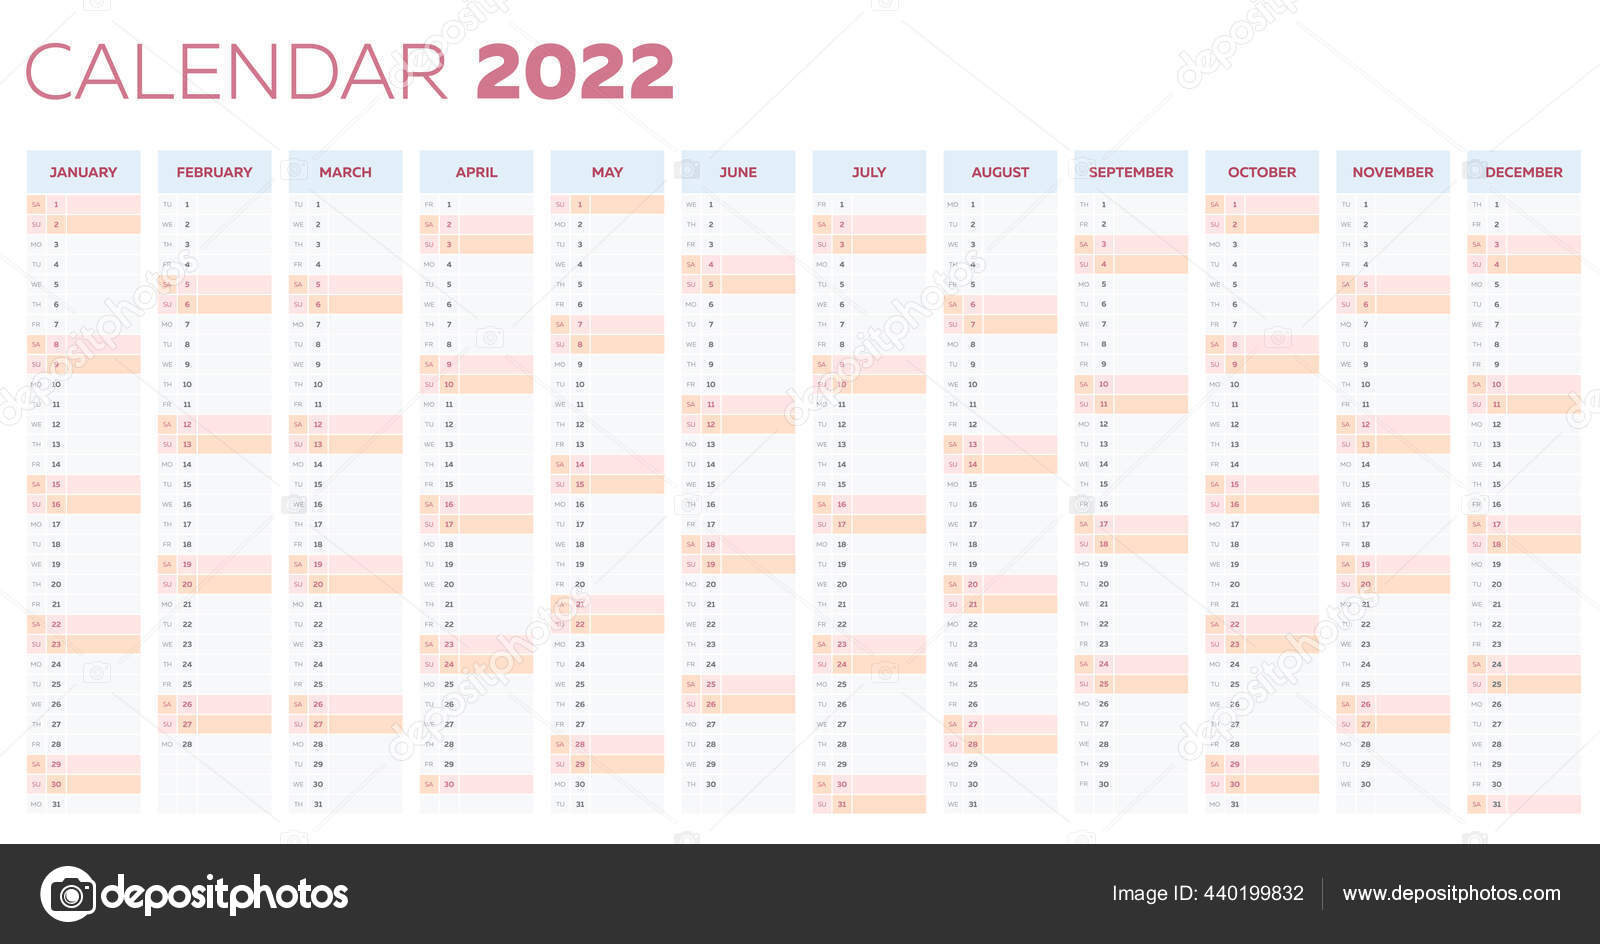 Planning Calendar 2022 The 2022 Calendar Planner Template With Vertical Monthly Columns Stock  Vector Image By ©Mooo #440199832